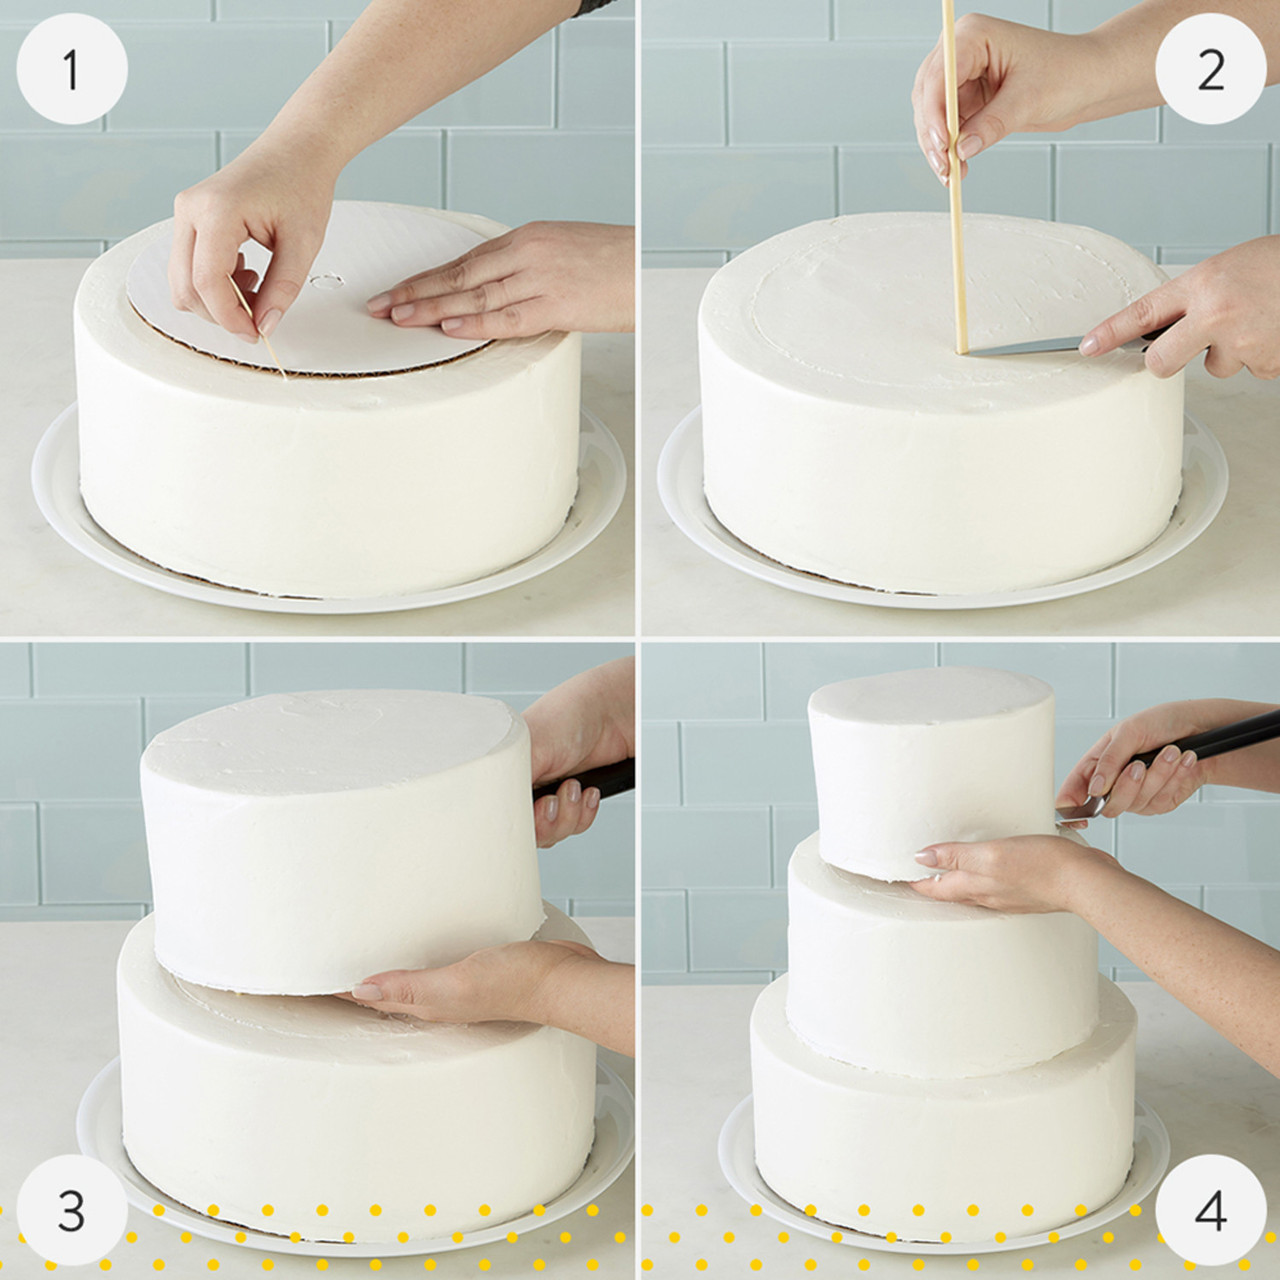 How To Stack A Tier Cake 